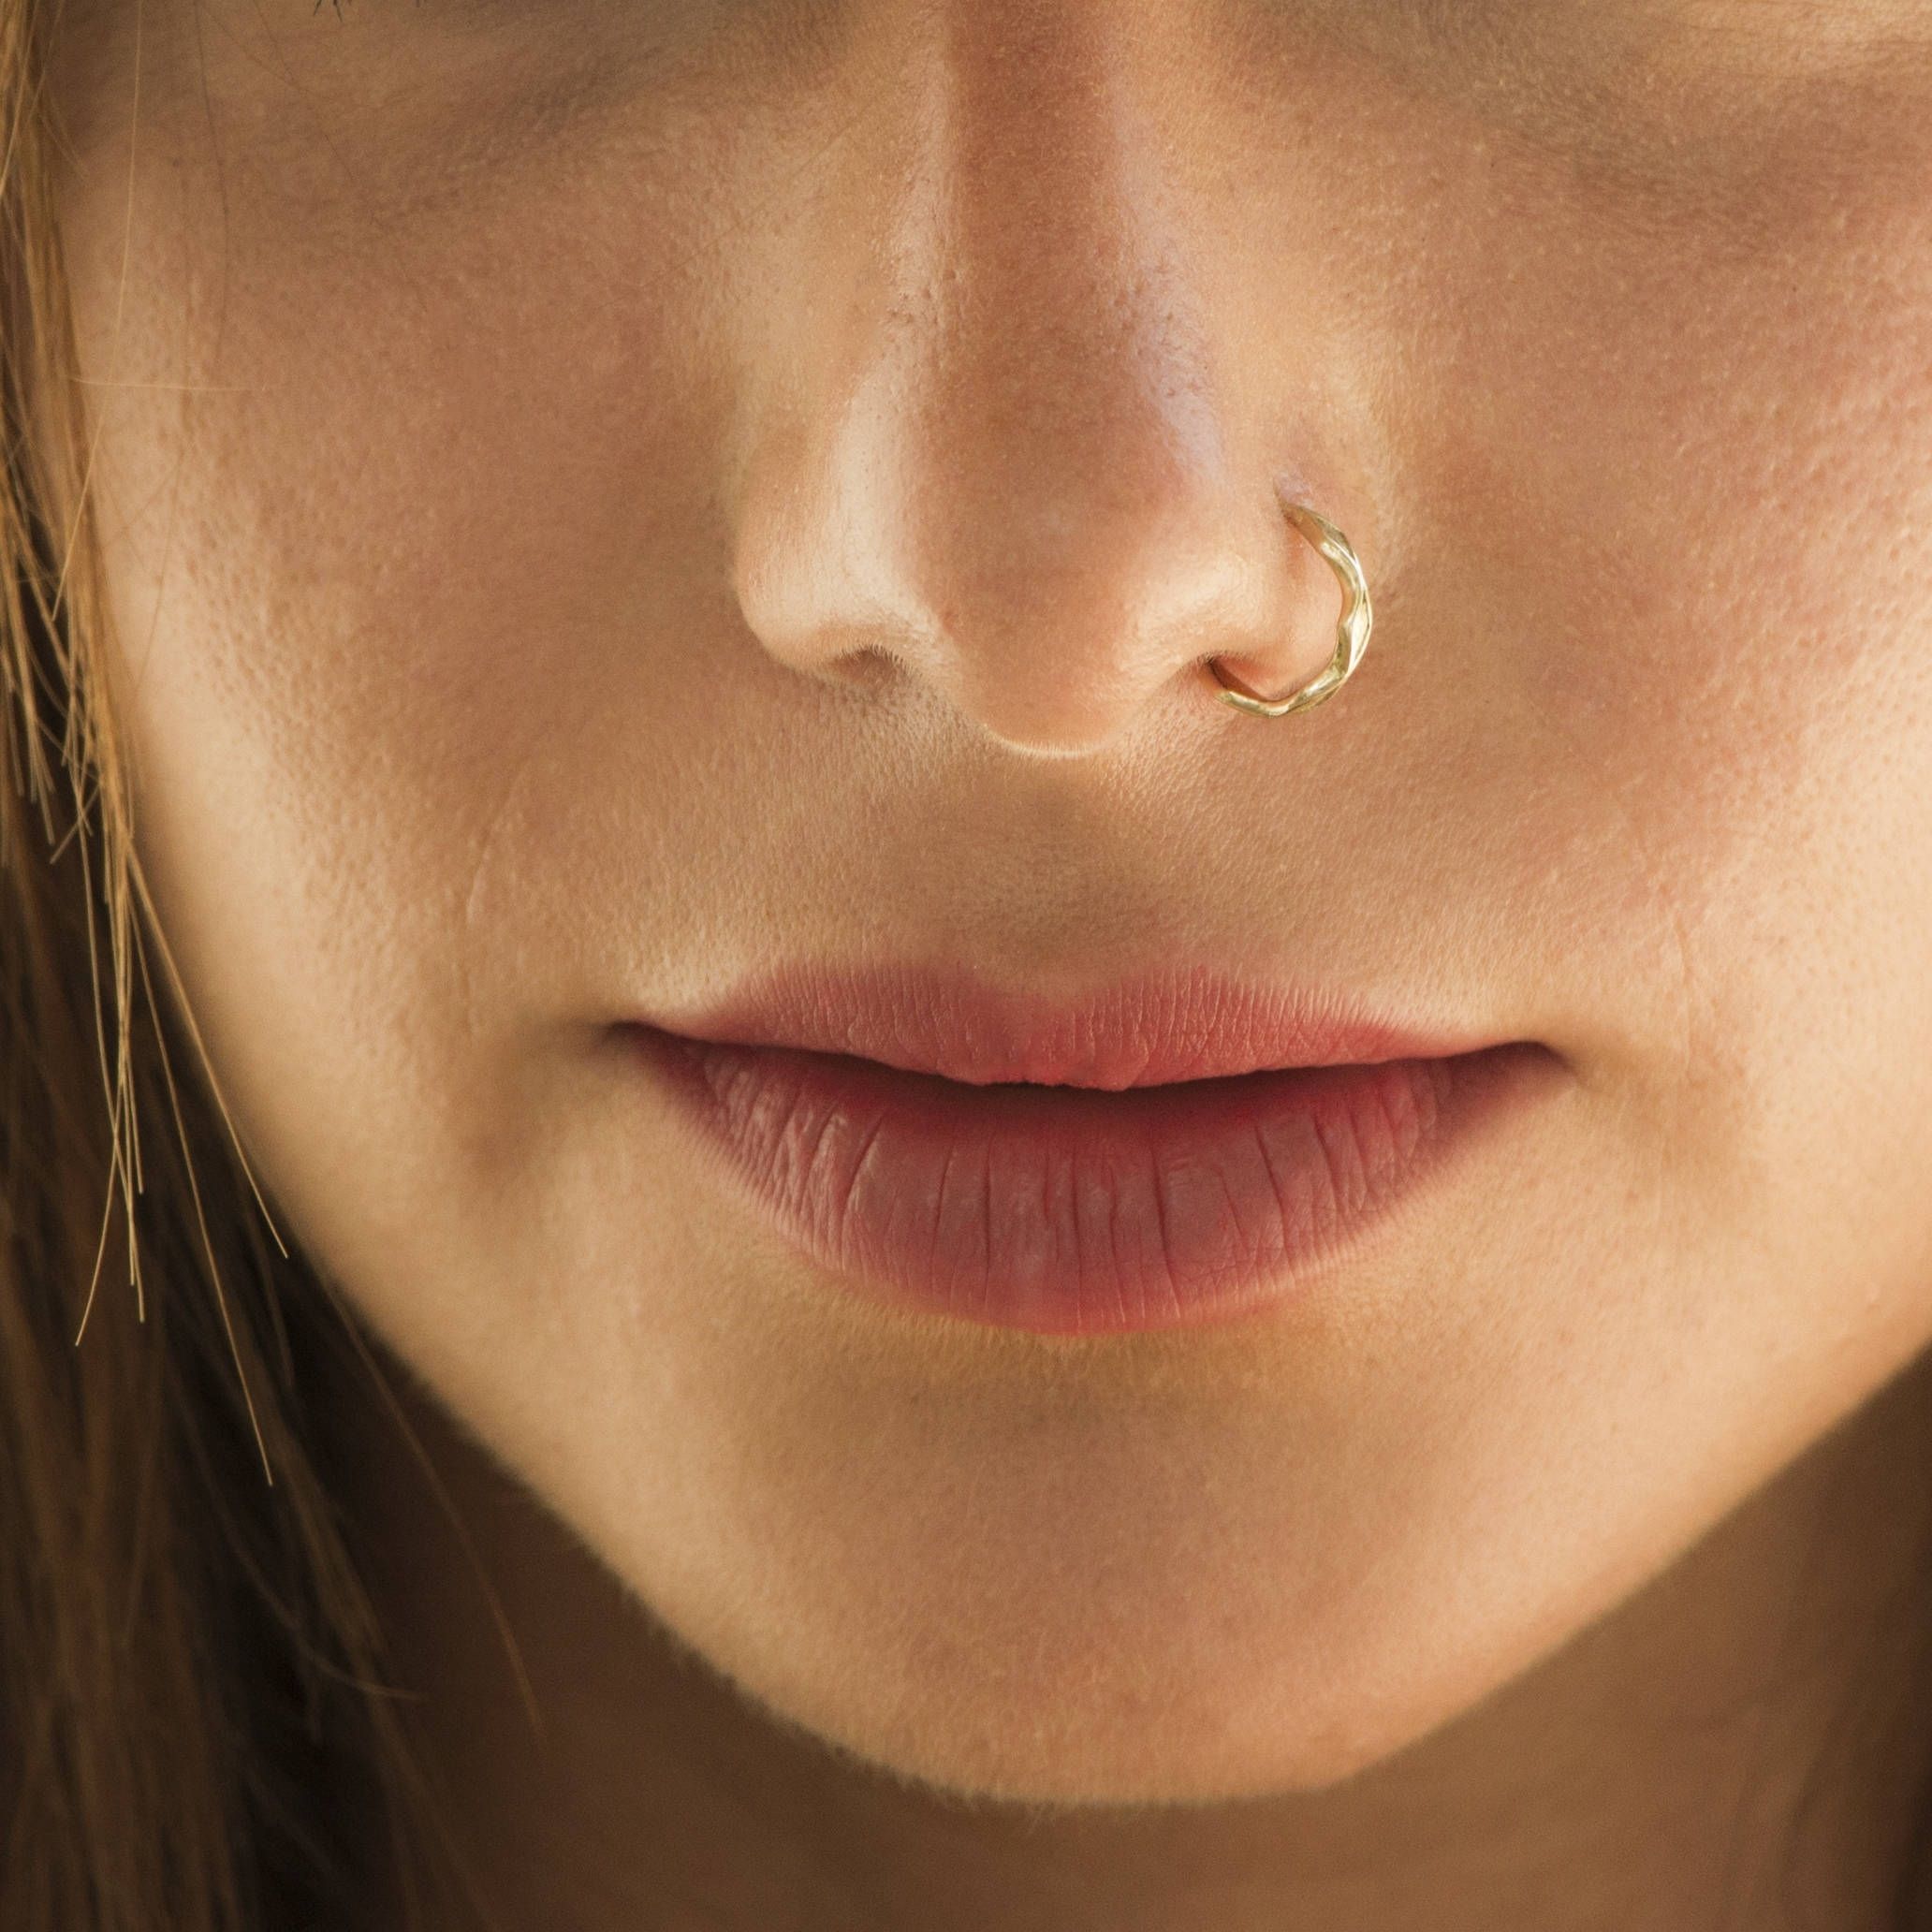 Nose Jewelry, Nose Piercing, Gold Nose Ring, Unique Nose Stud Intended For Newest Chevron Nose Rings (View 7 of 15)